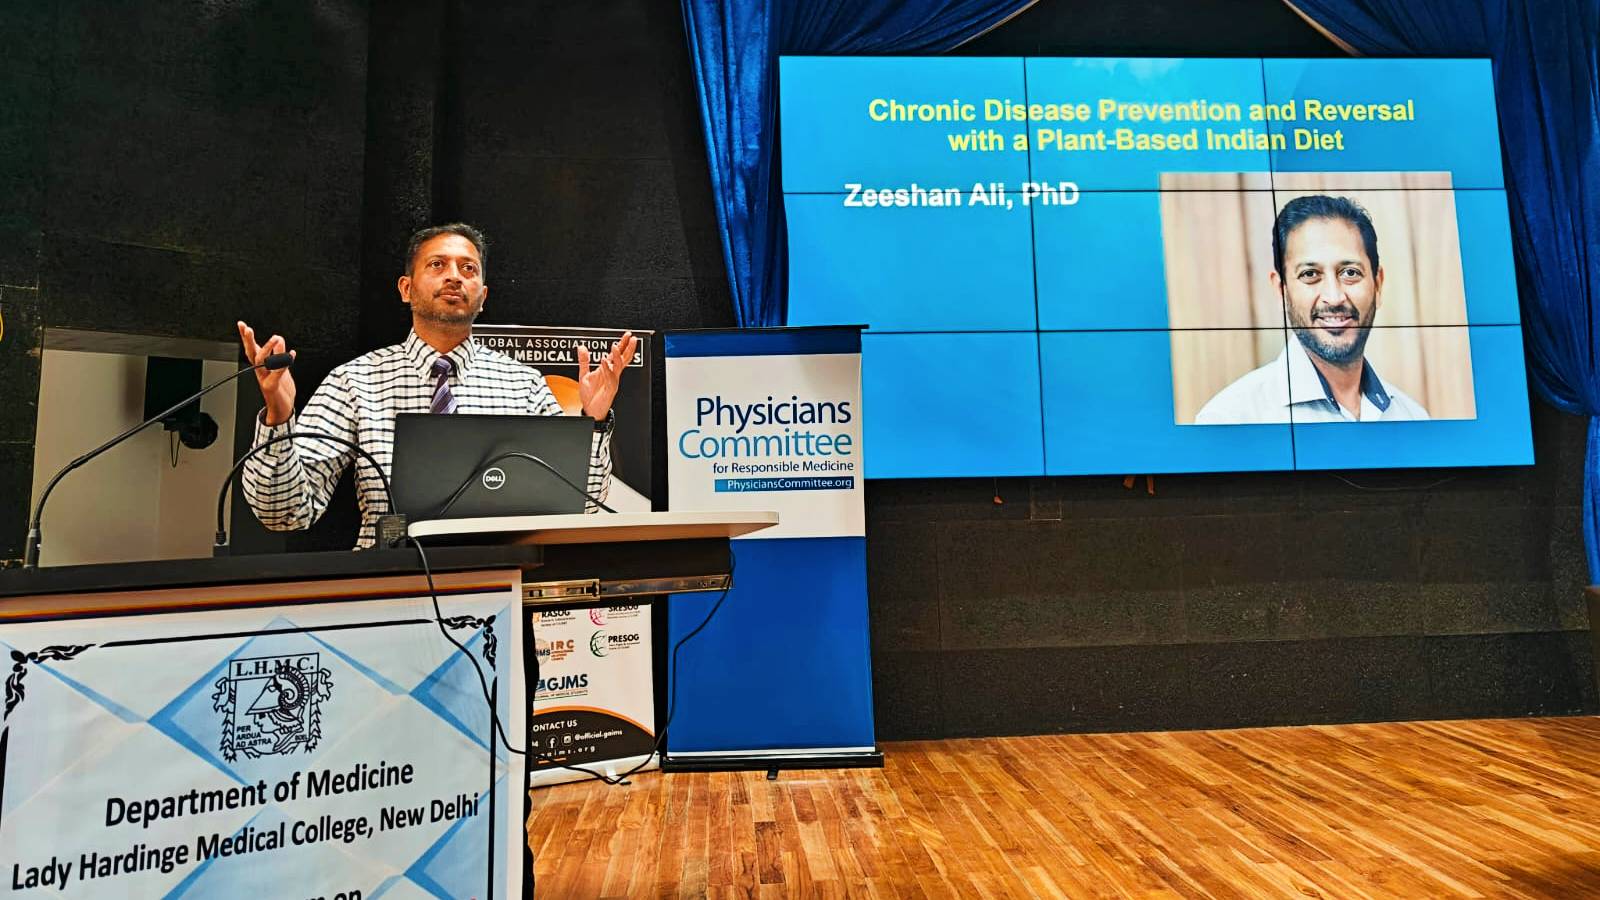 Dr. Zeeshan Ali gives a lecture on plant-based nutrition to medical students at Lady Hardinge Medical College in Delhi, India.